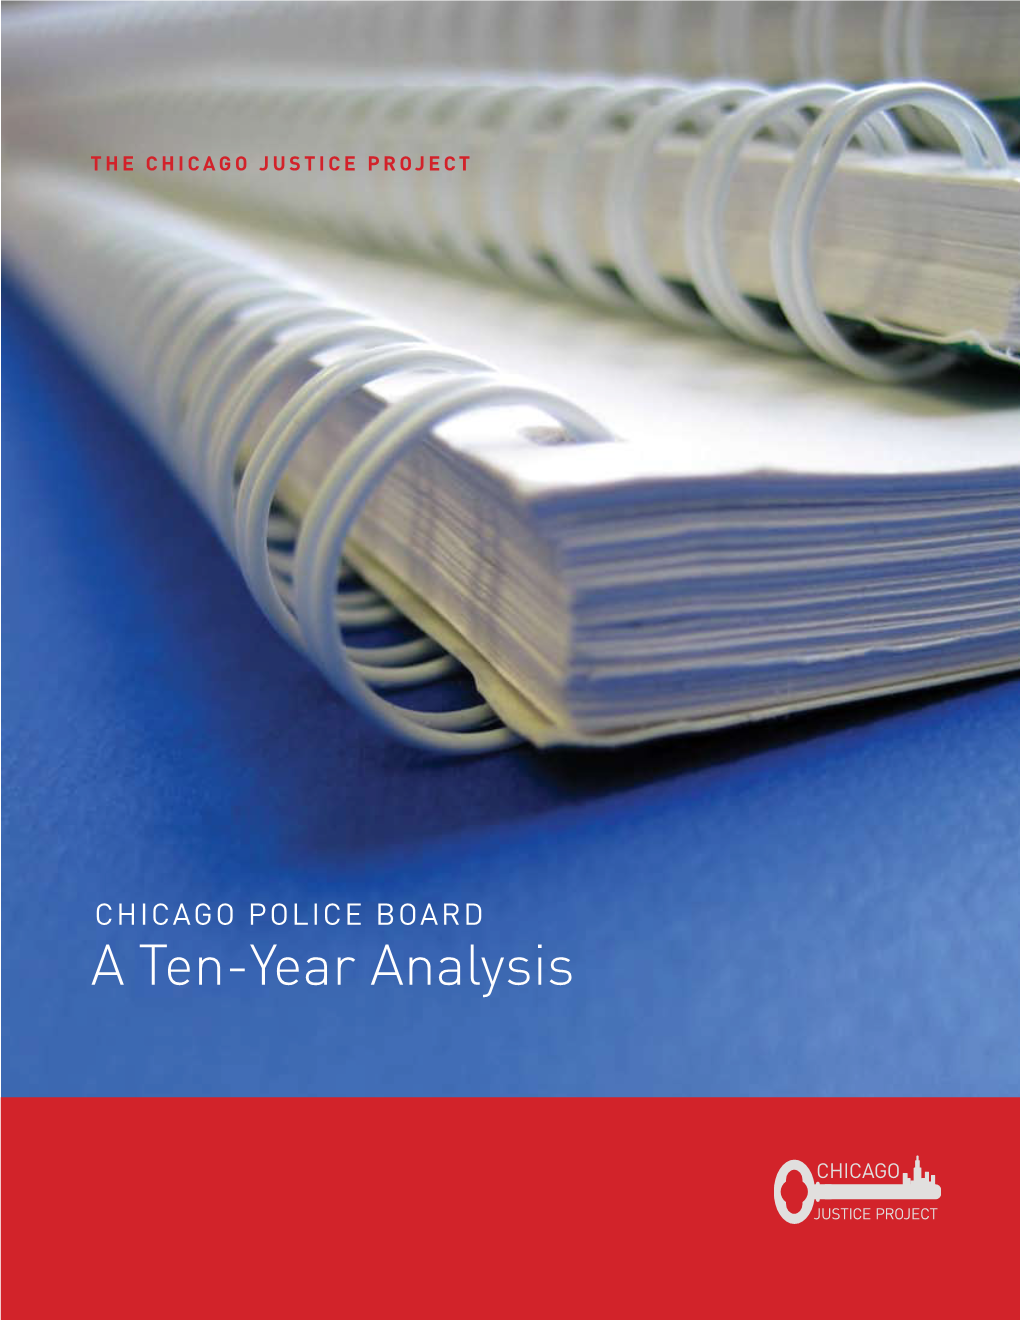 Chicago Police Board: a Ten-Year Analysis